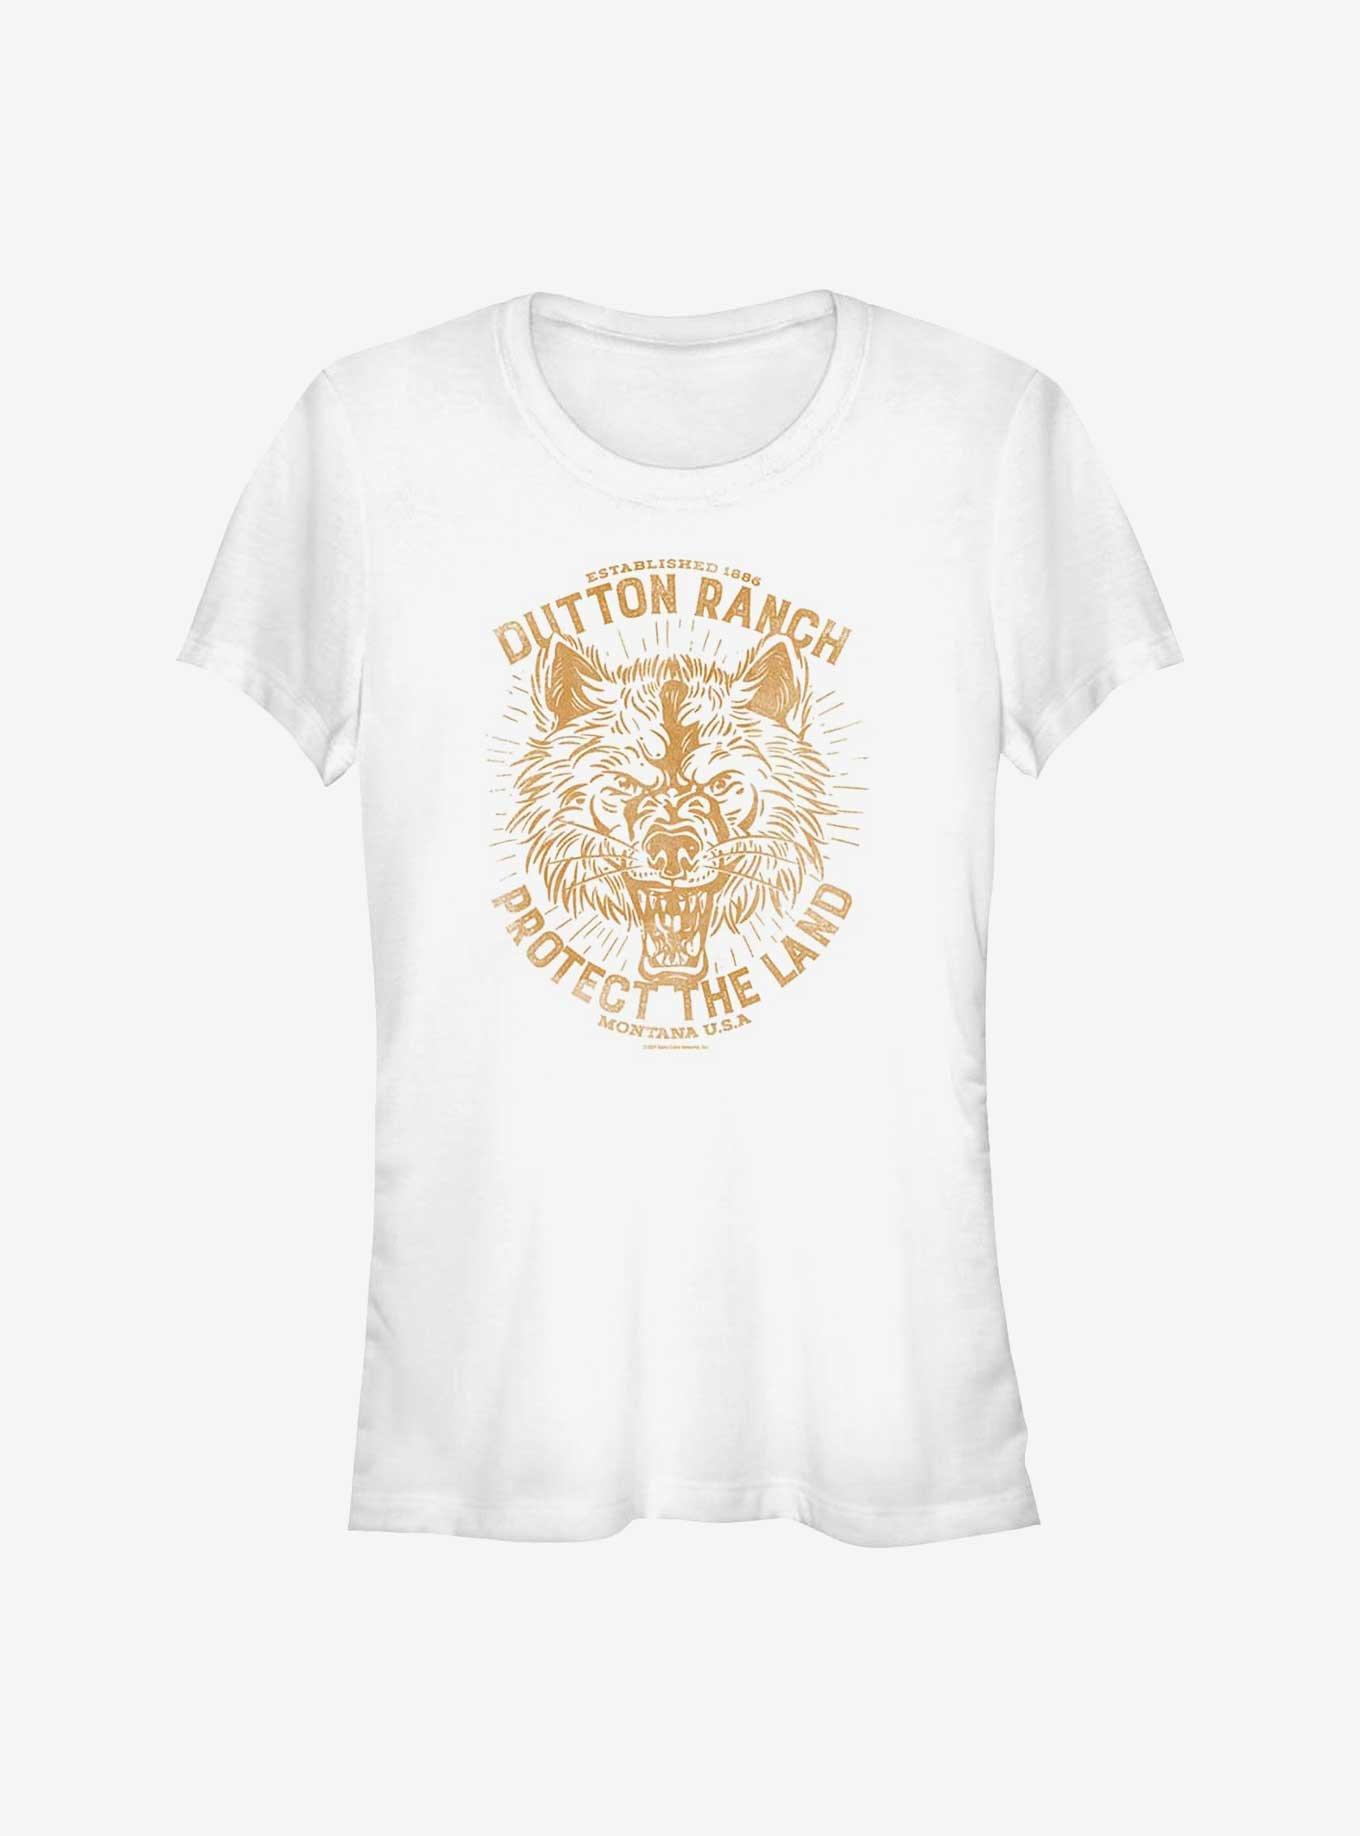 Yellowstone Wolf Protect The Land Girls T-Shirt, WHITE, hi-res